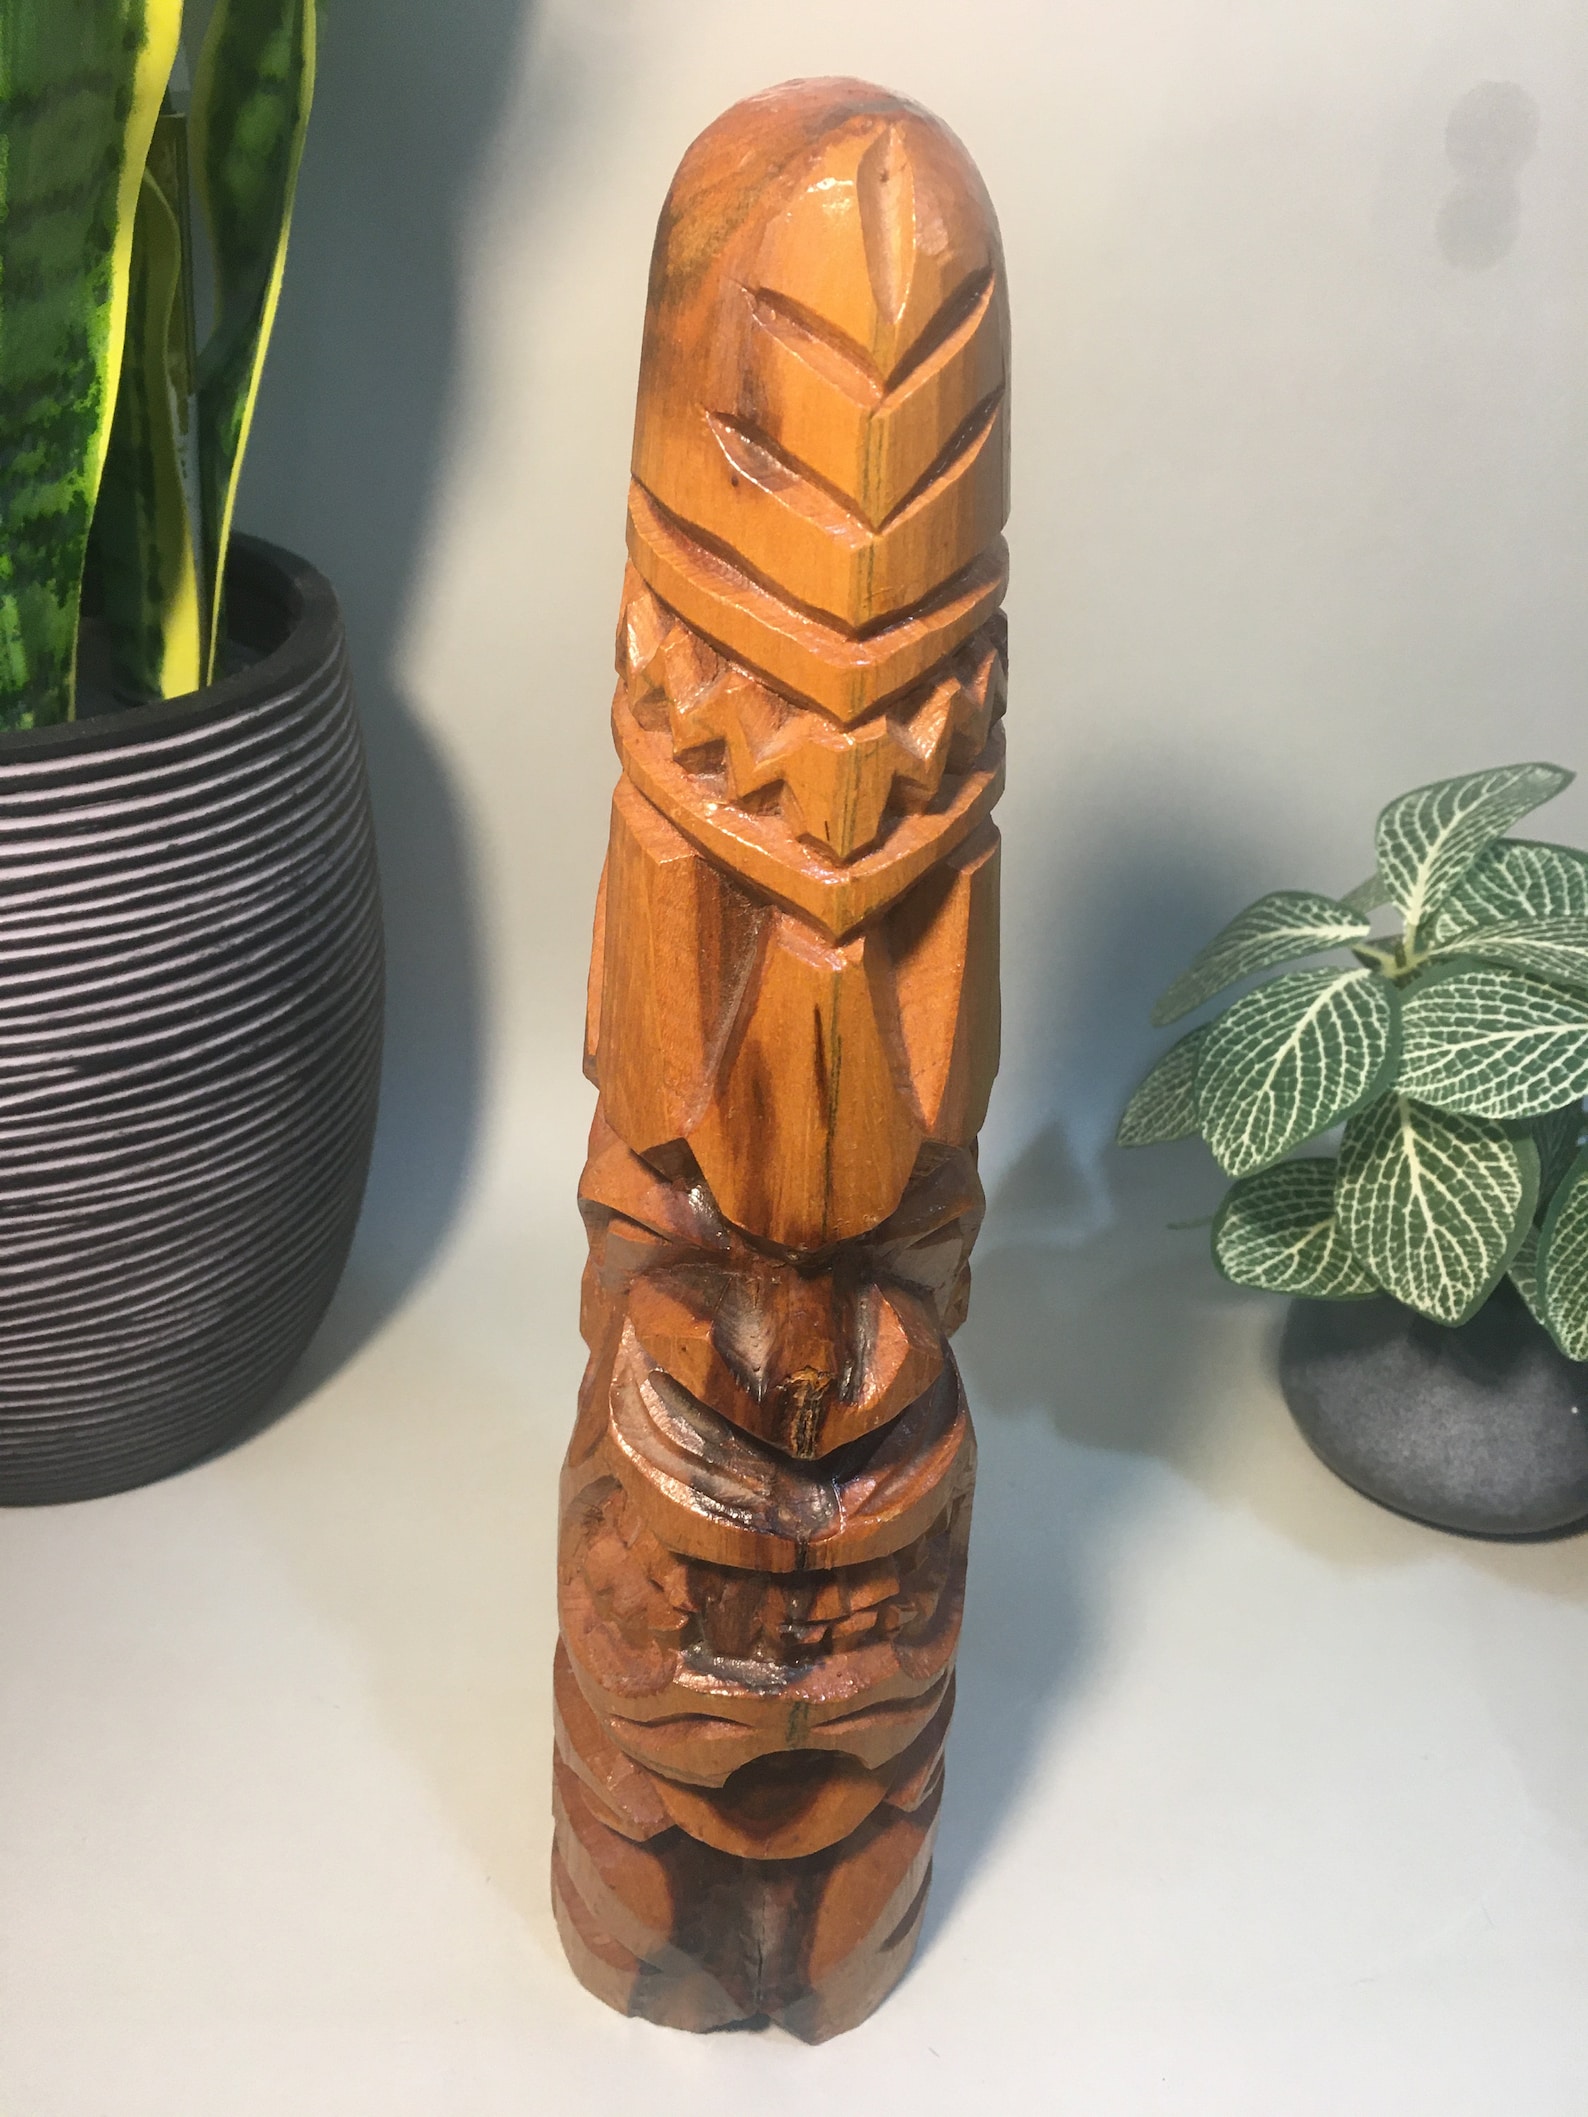 Tiki Idol wooden carved carving Hawaiian Island style old | Etsy